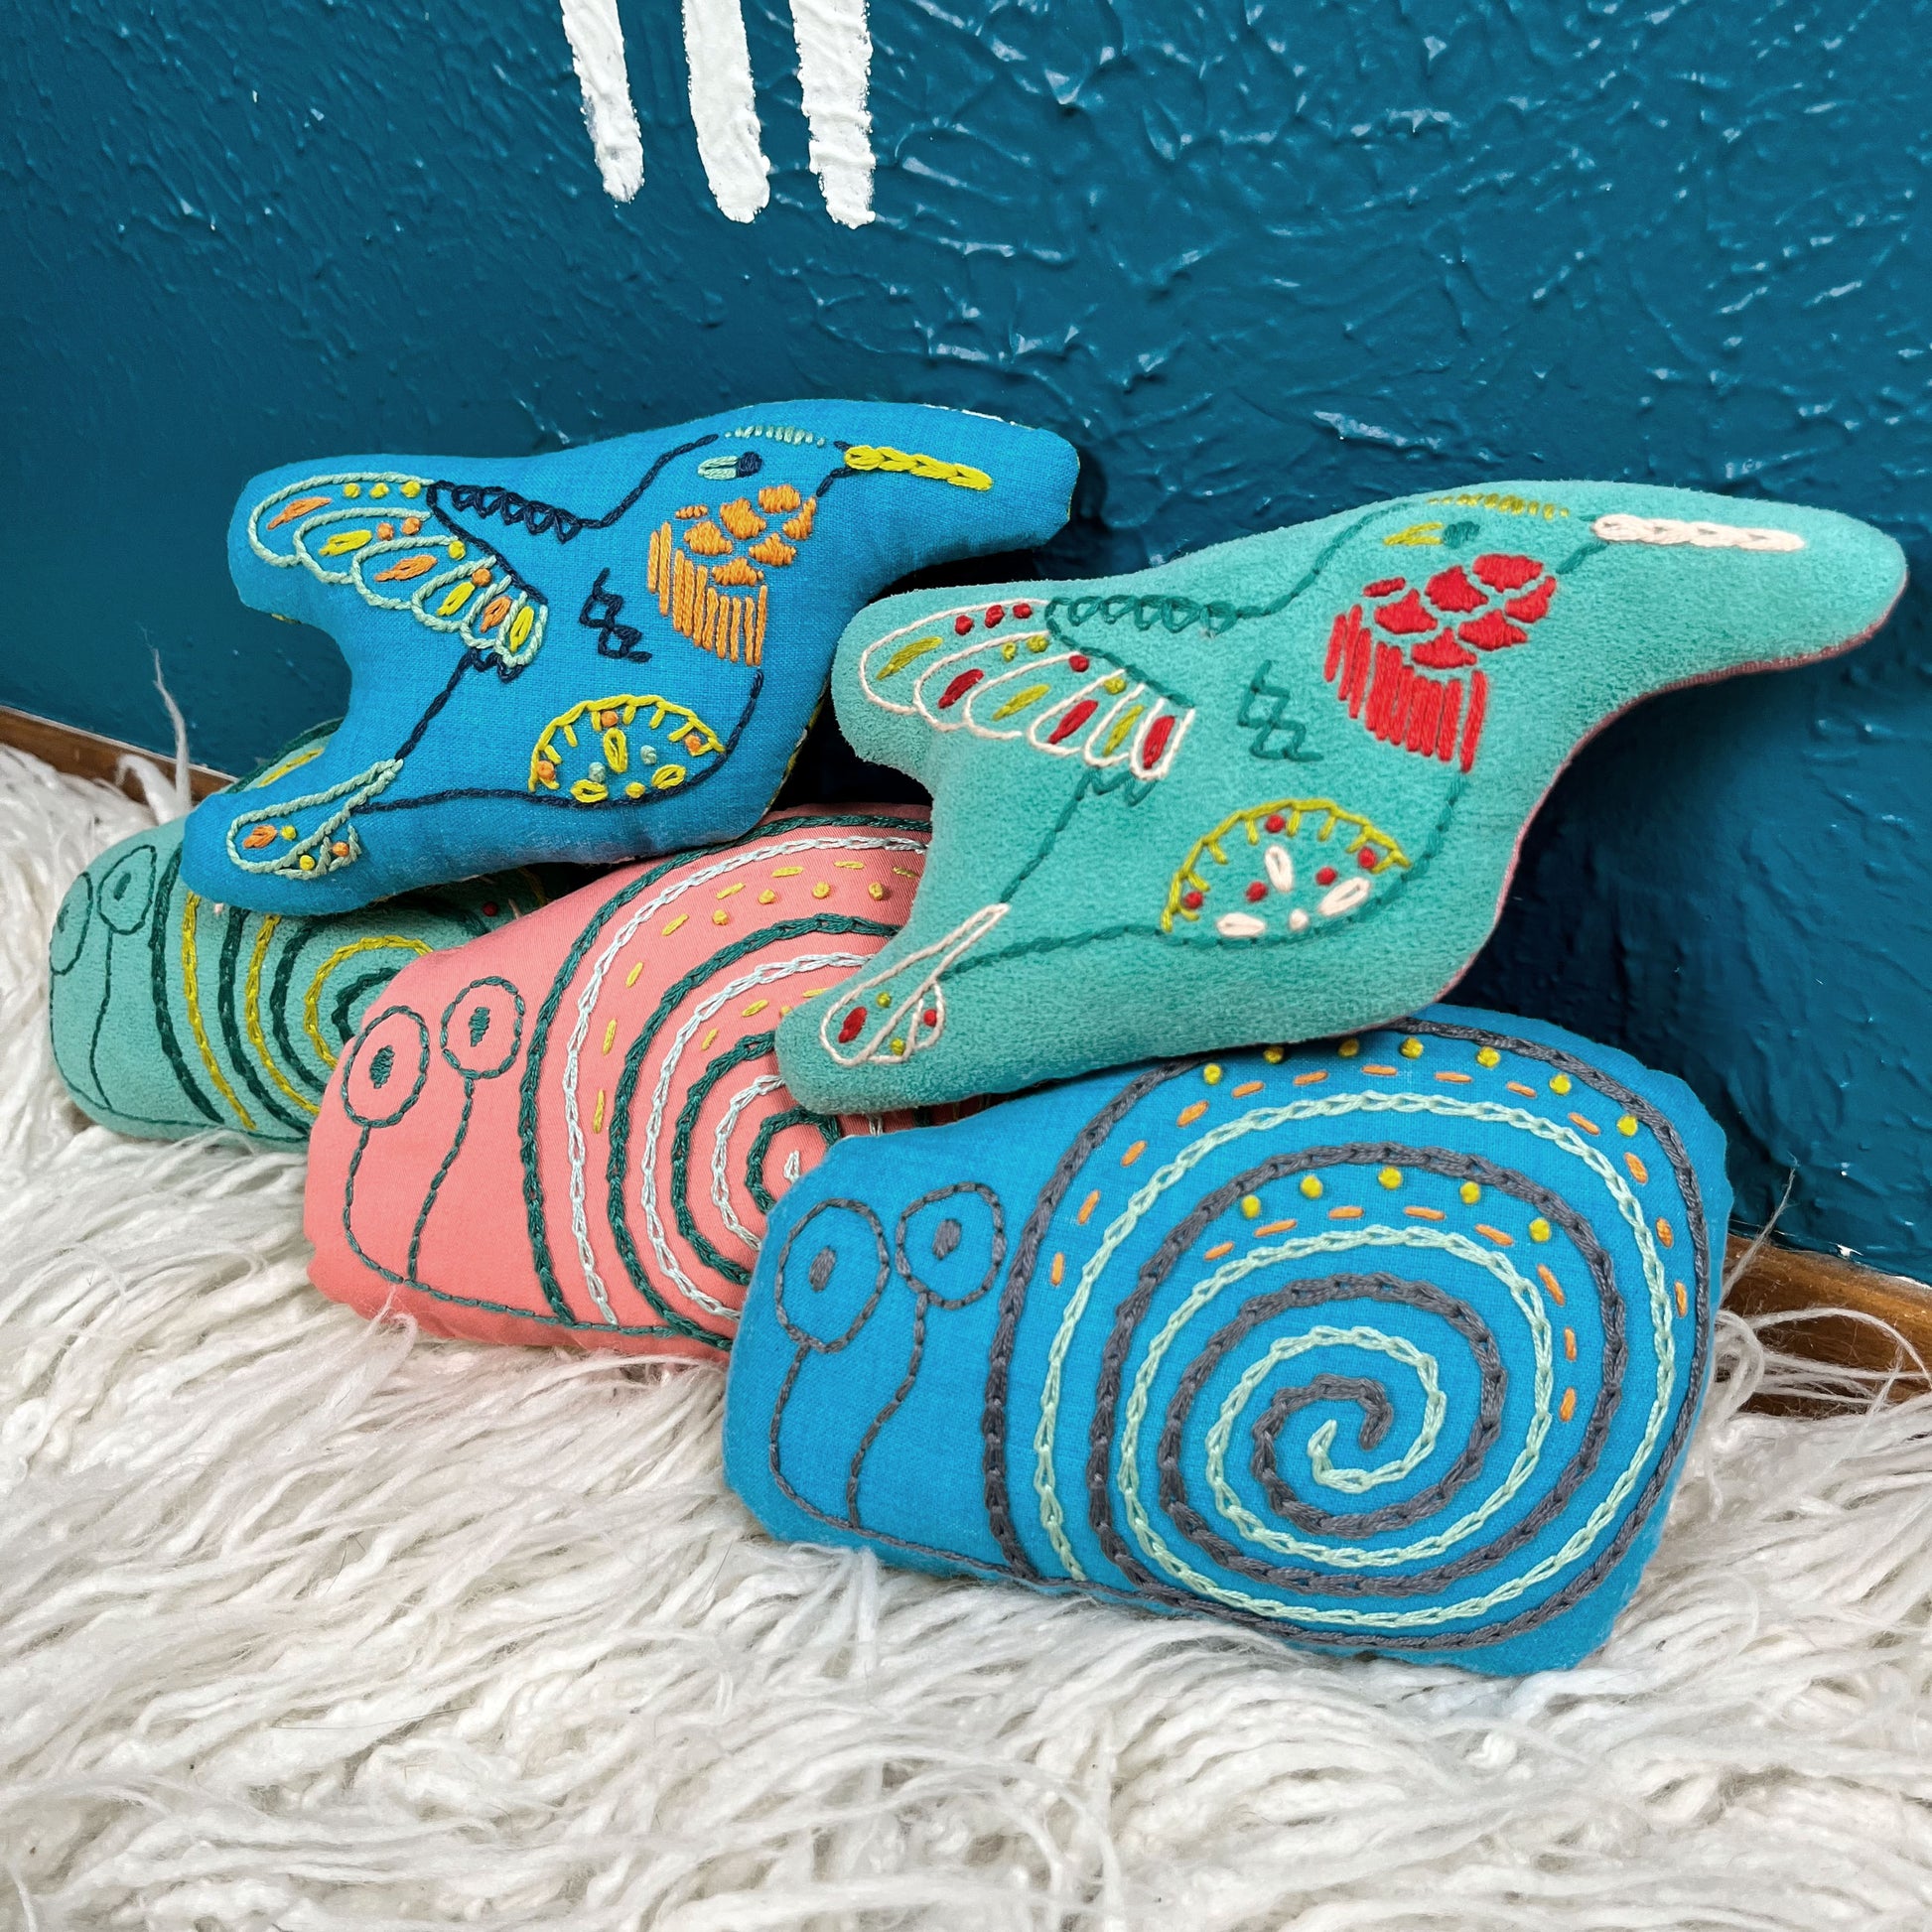 a group of colorfully hand embroidered hummingbird and snail stuffed animal pillows in blue, seafoam green and coral fabric, in a pile on a furry white rug in front of a teal wall